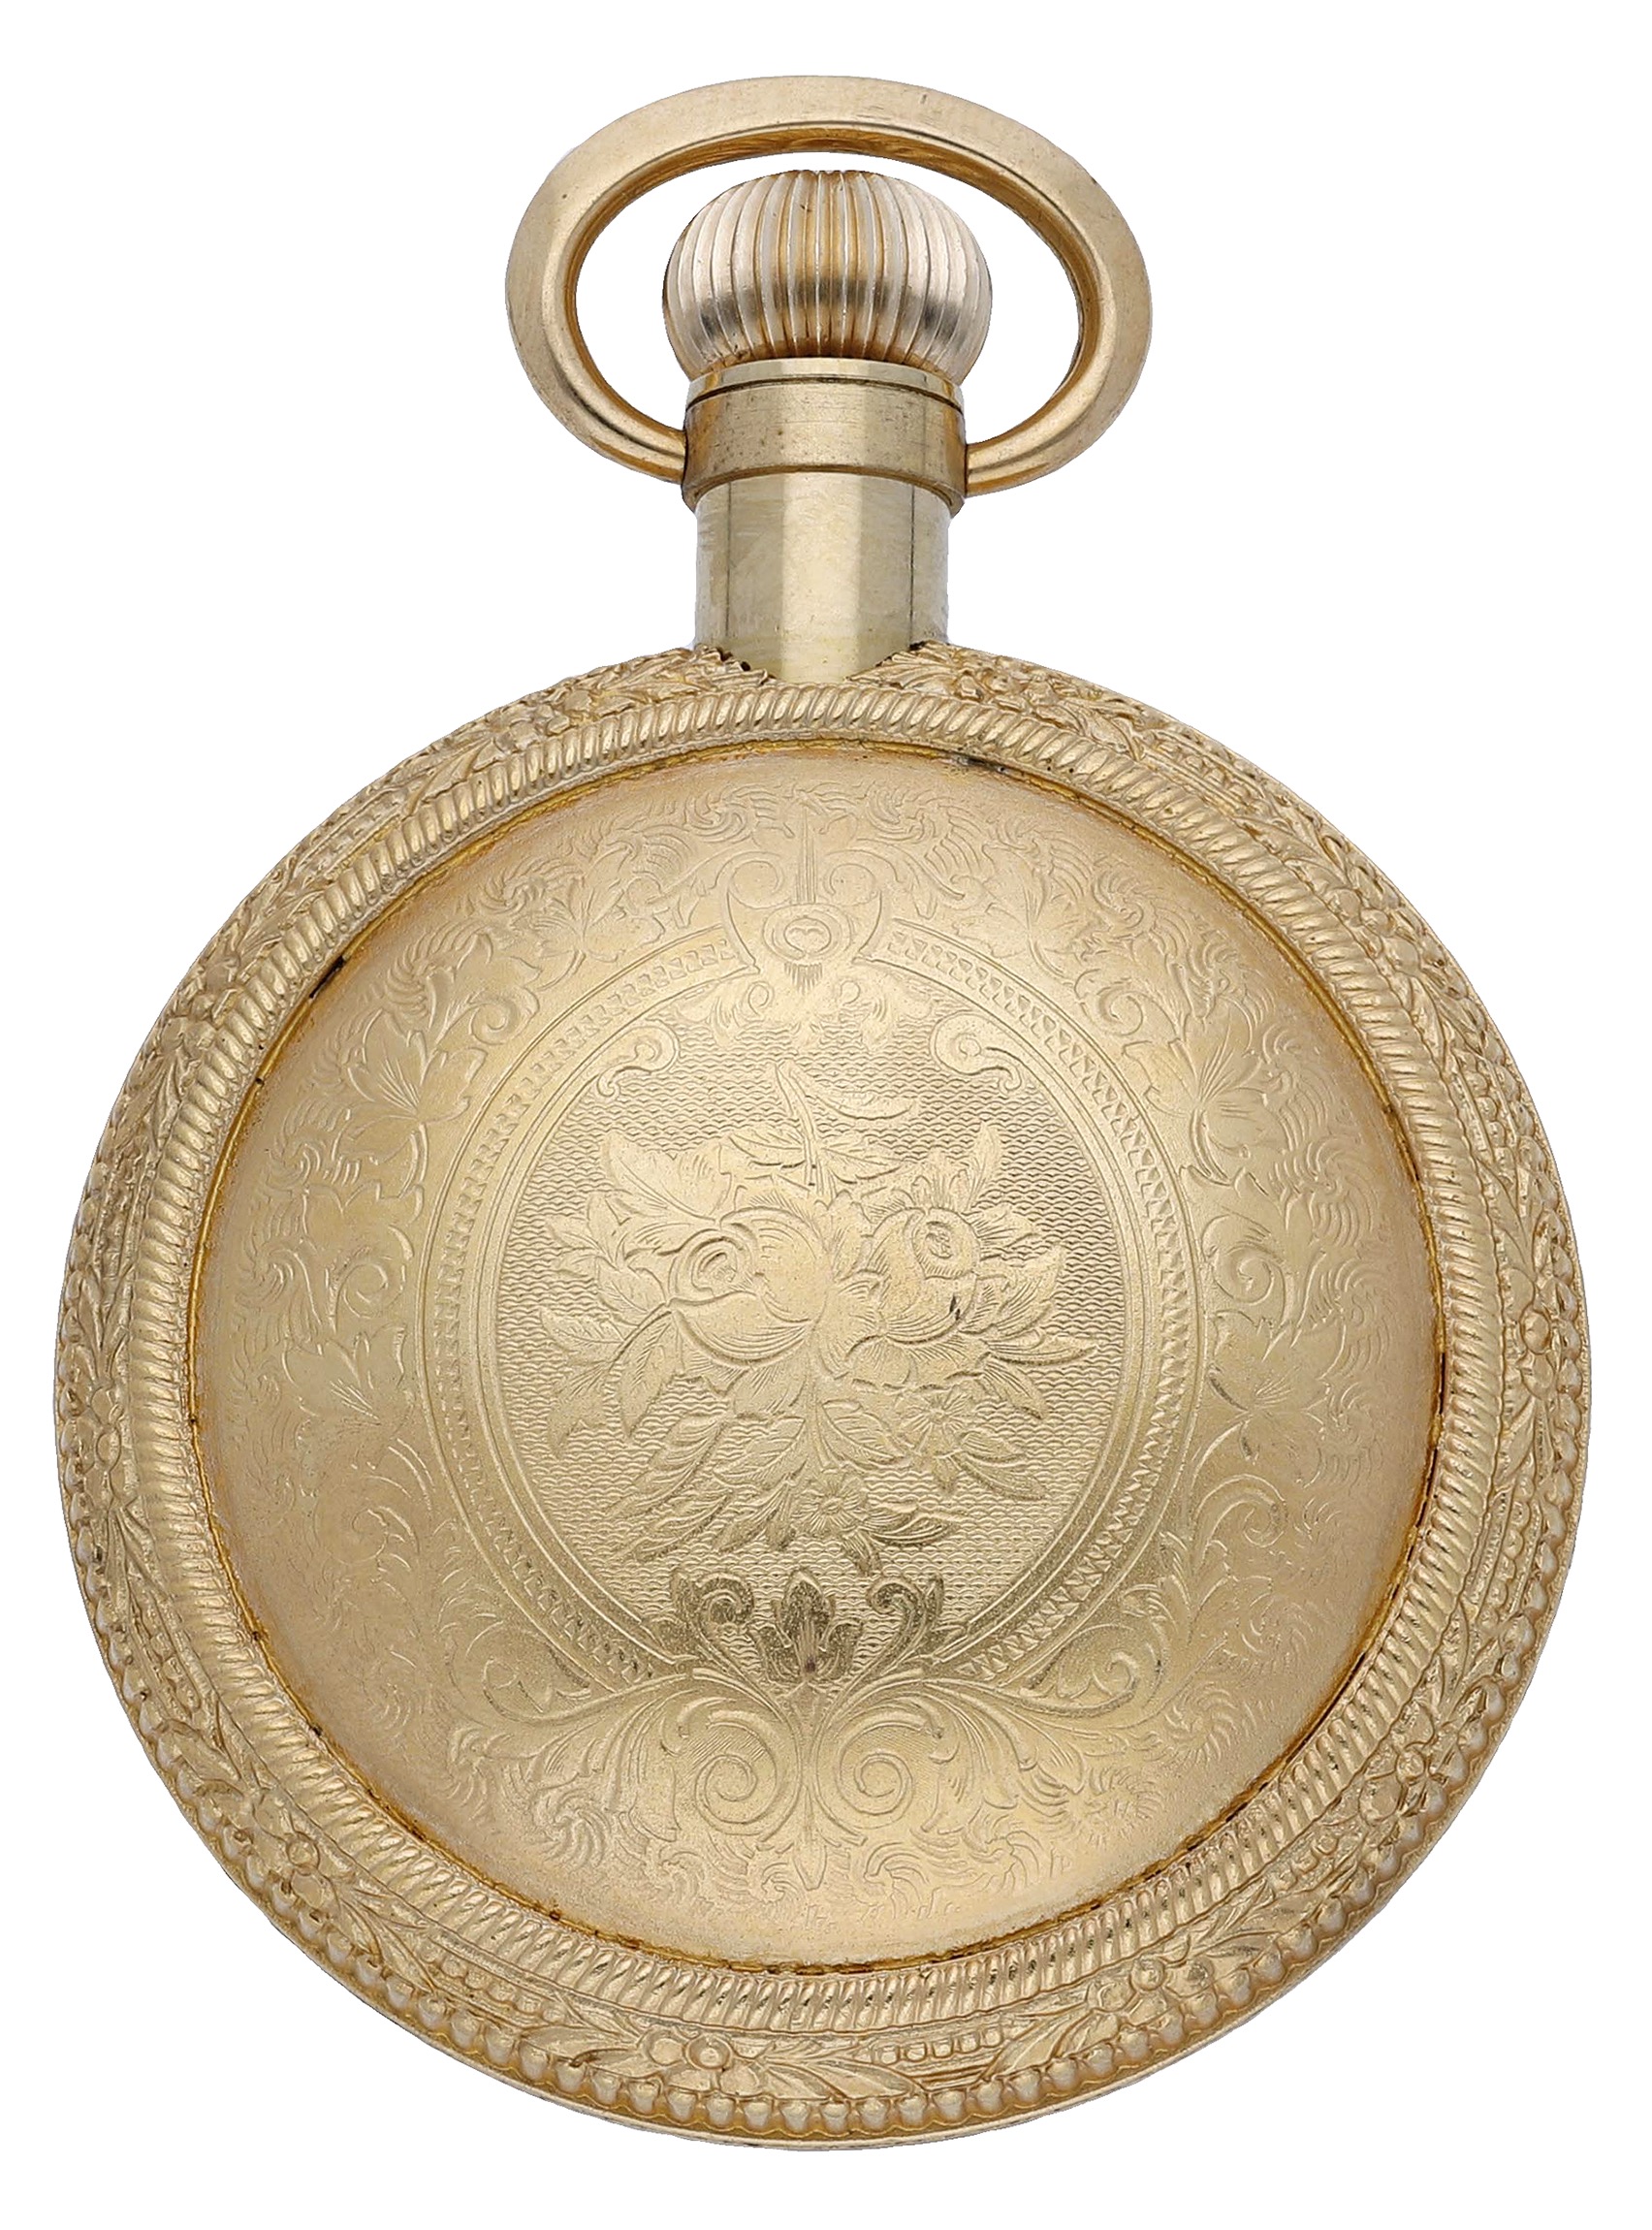 Rolex. A gilt metal and glass perfume bottle in the form of a pocket watch, Perpetually Yours, ci... - Image 3 of 6